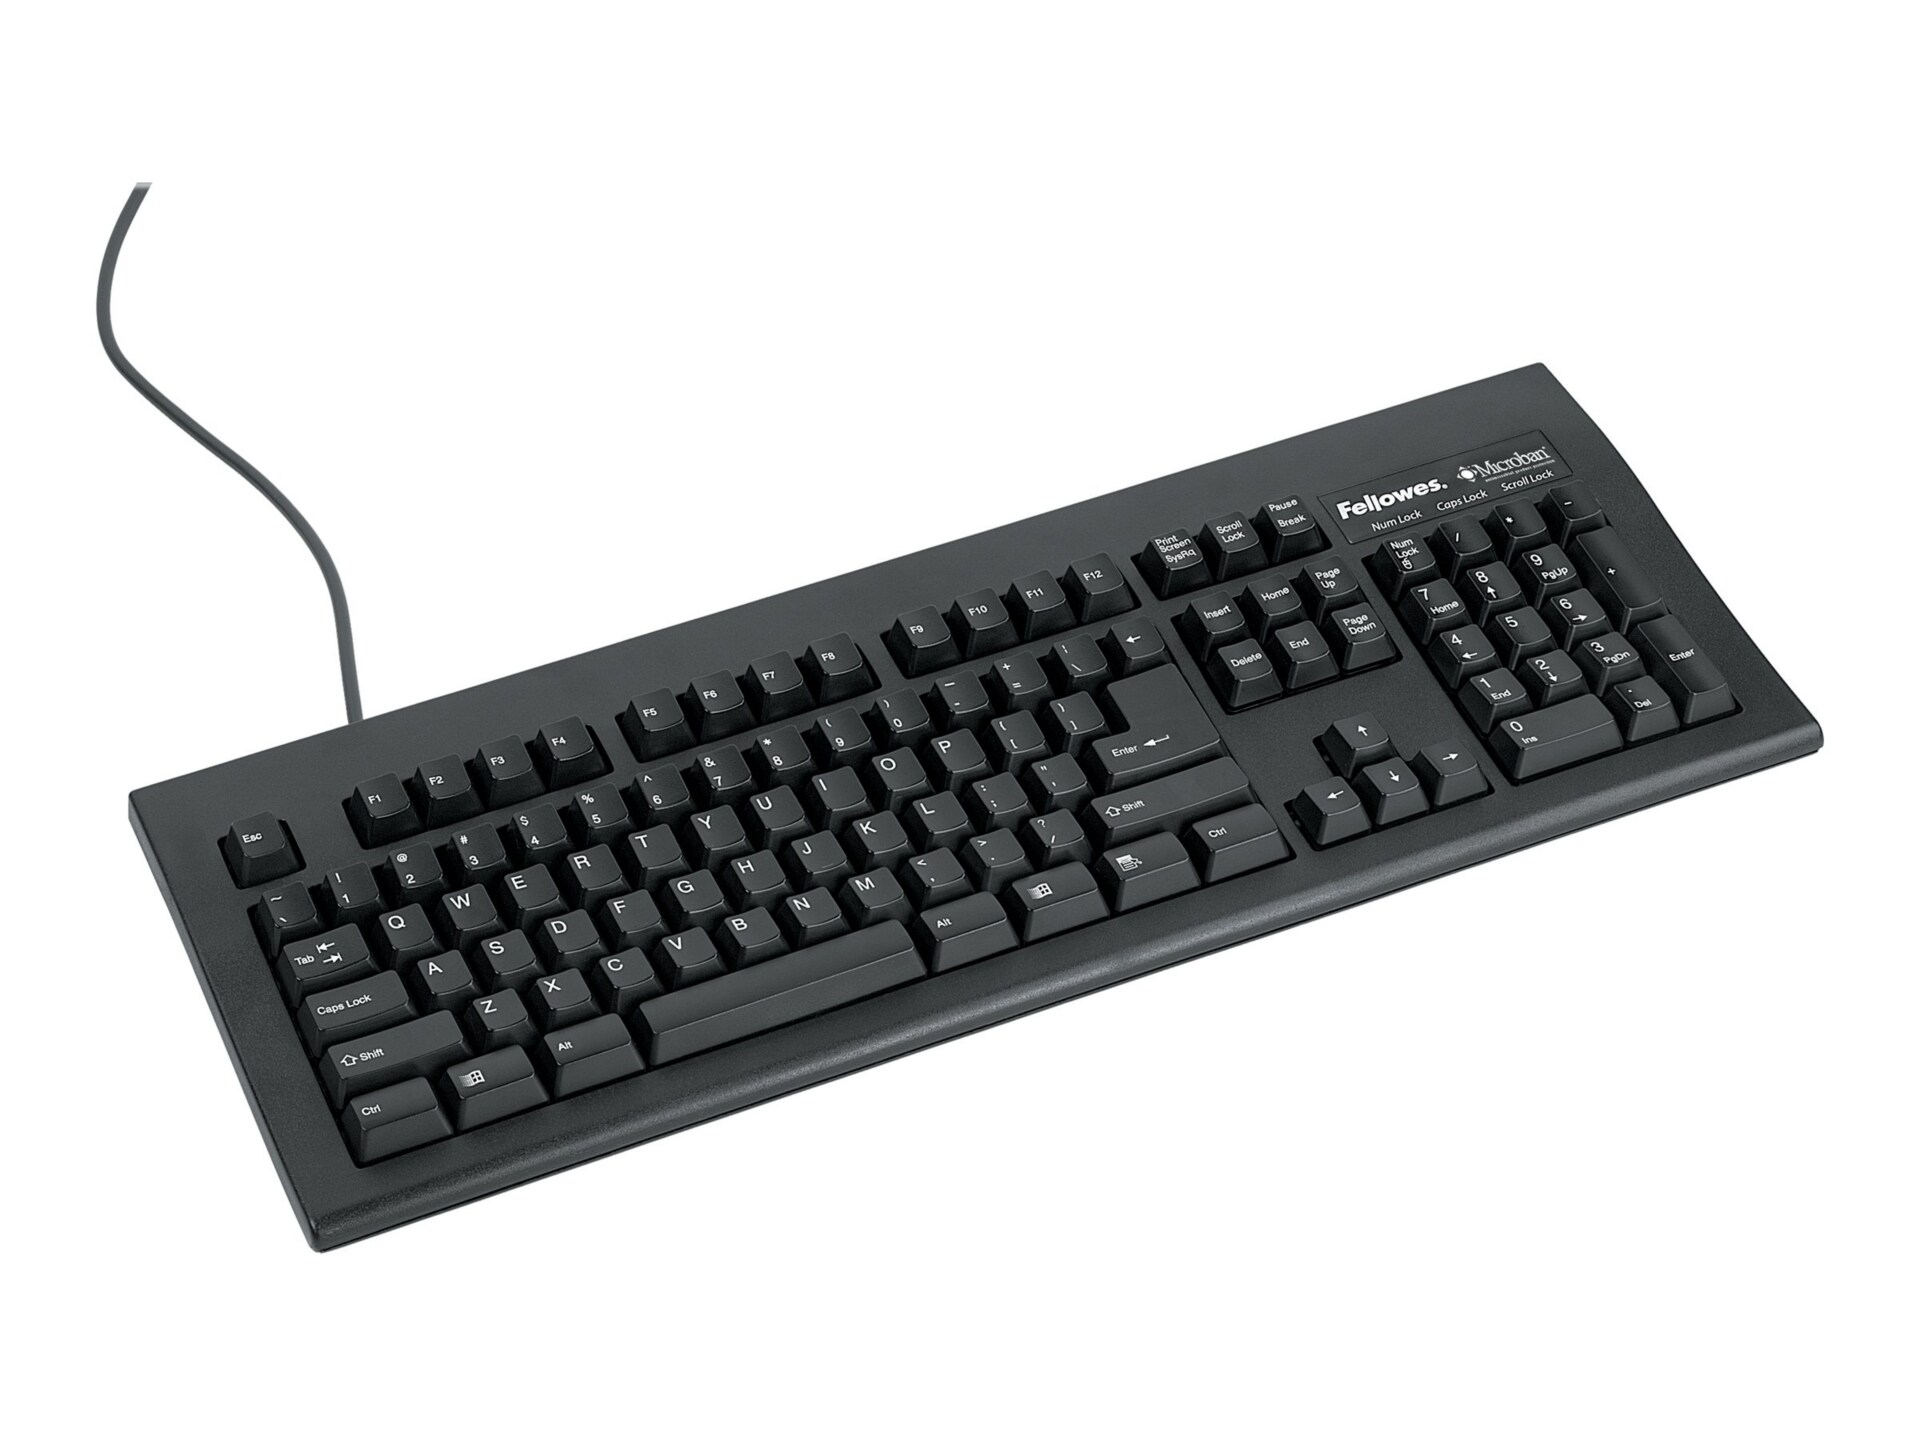 Fellowes Basic 104 Keyboard with Microban® Protections